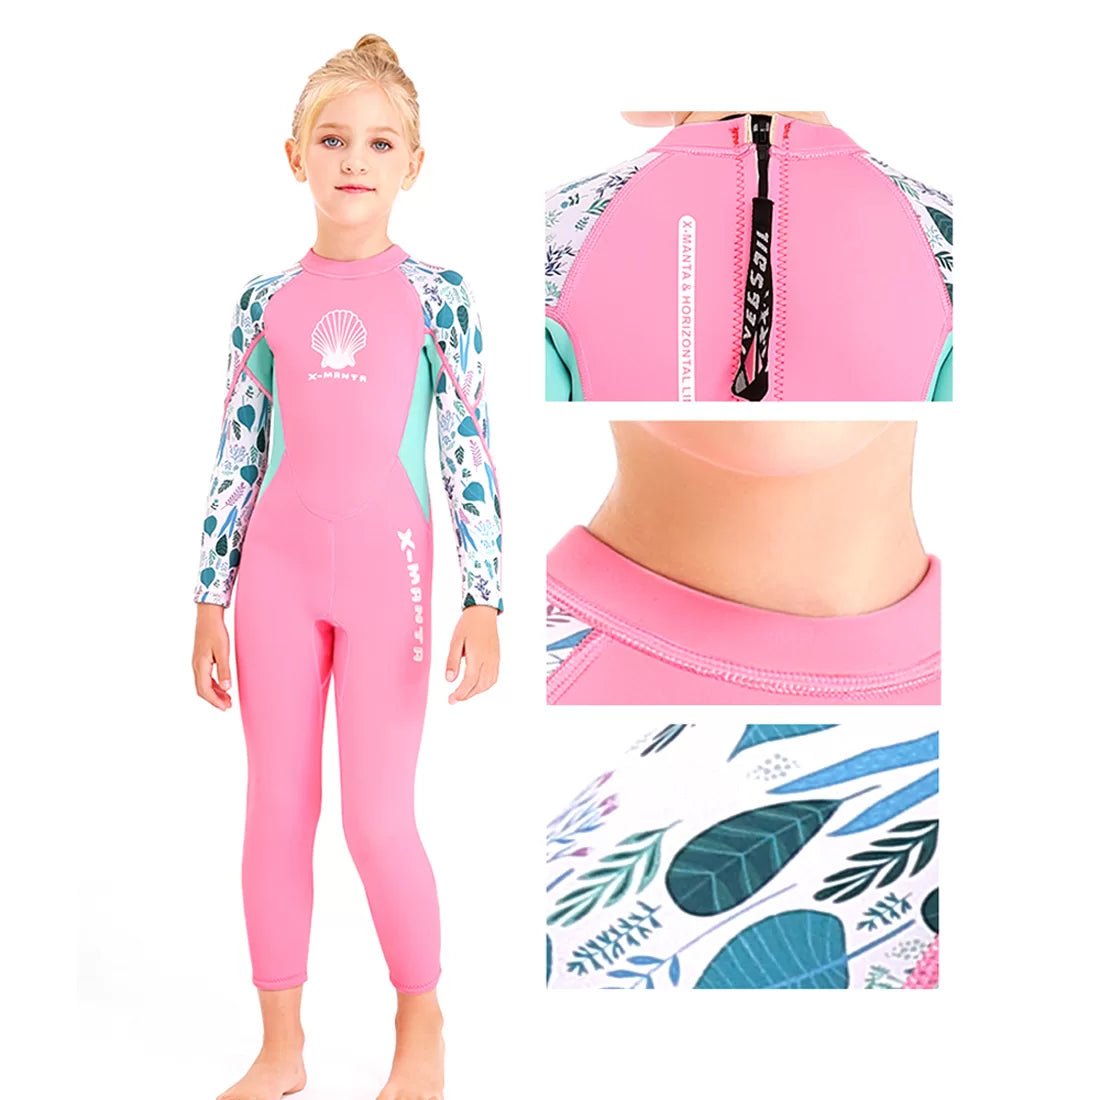 2.55mm Neoprene Full Length Kids Swimsuit, Fluorescent Pink with Floral Sleeve with UV protection - Little Surprise Box2.55mm Neoprene Full Length Kids Swimsuit, Fluorescent Pink with Floral Sleeve with UV protection